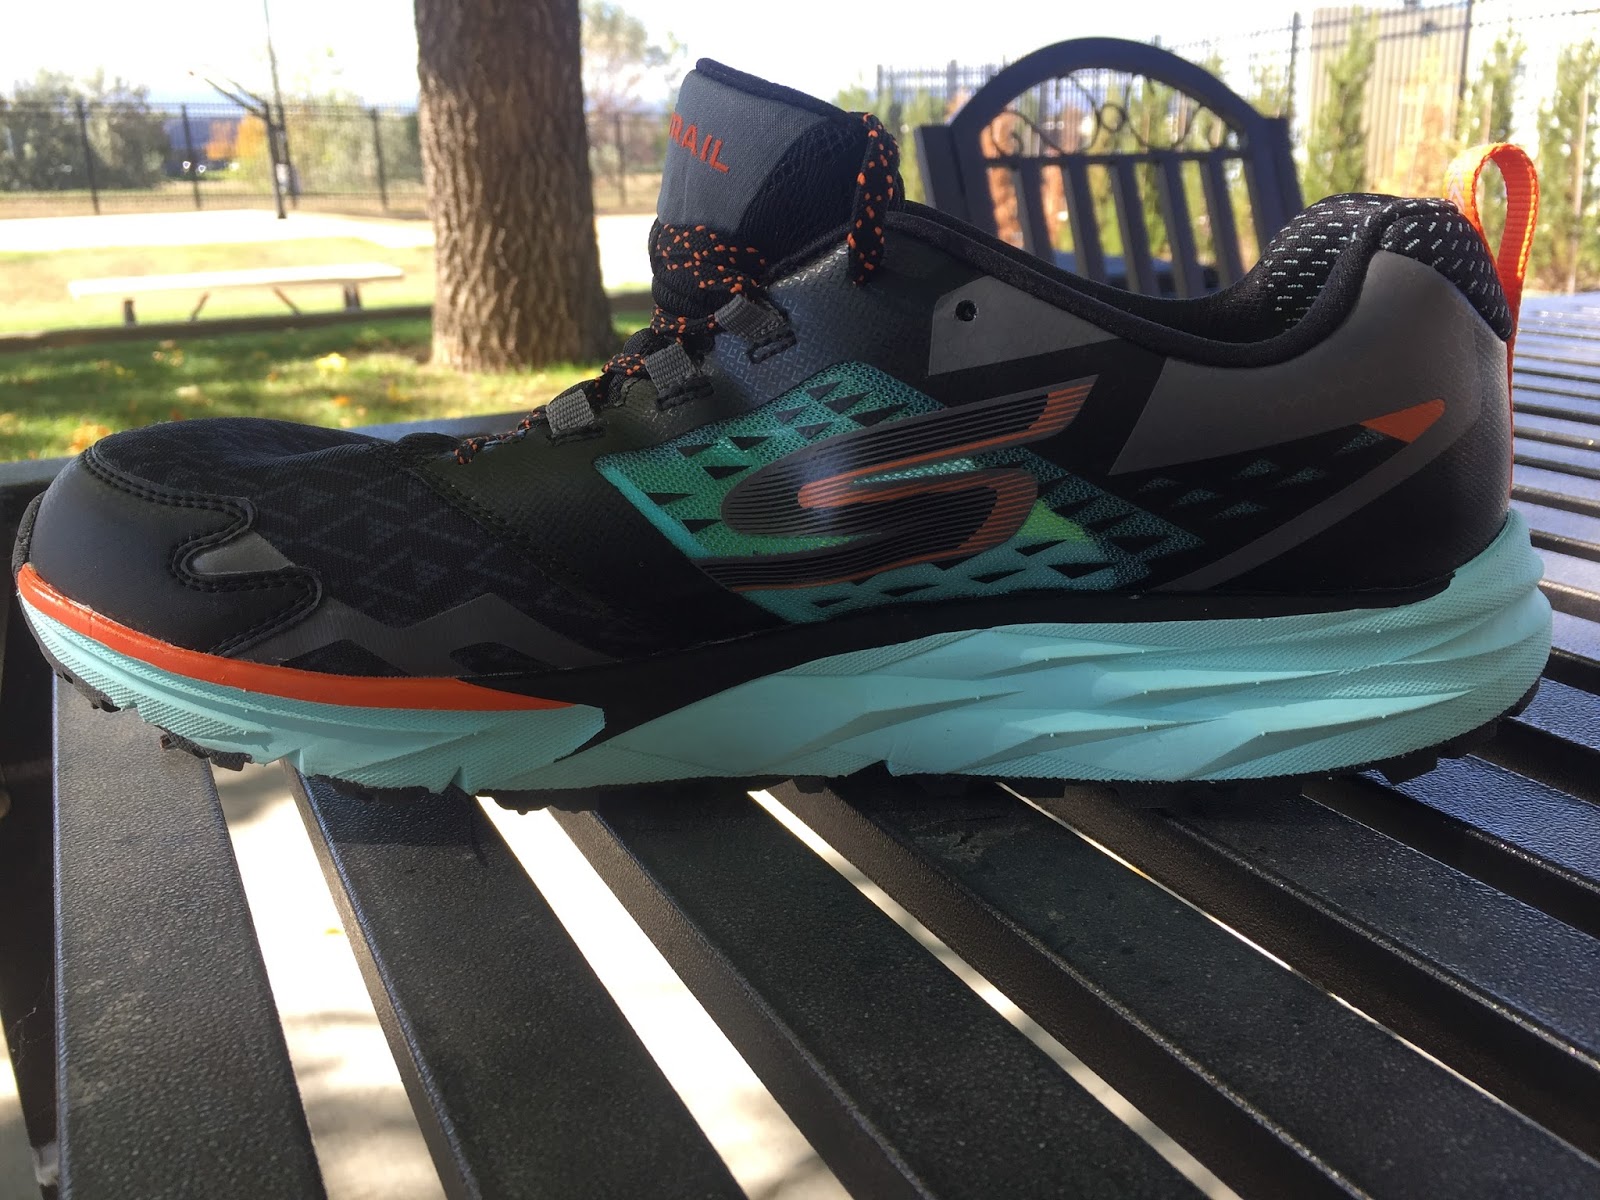 Road Trail Run: Skechers GoTrail - Cushion Comfort for More Casual Trail Use